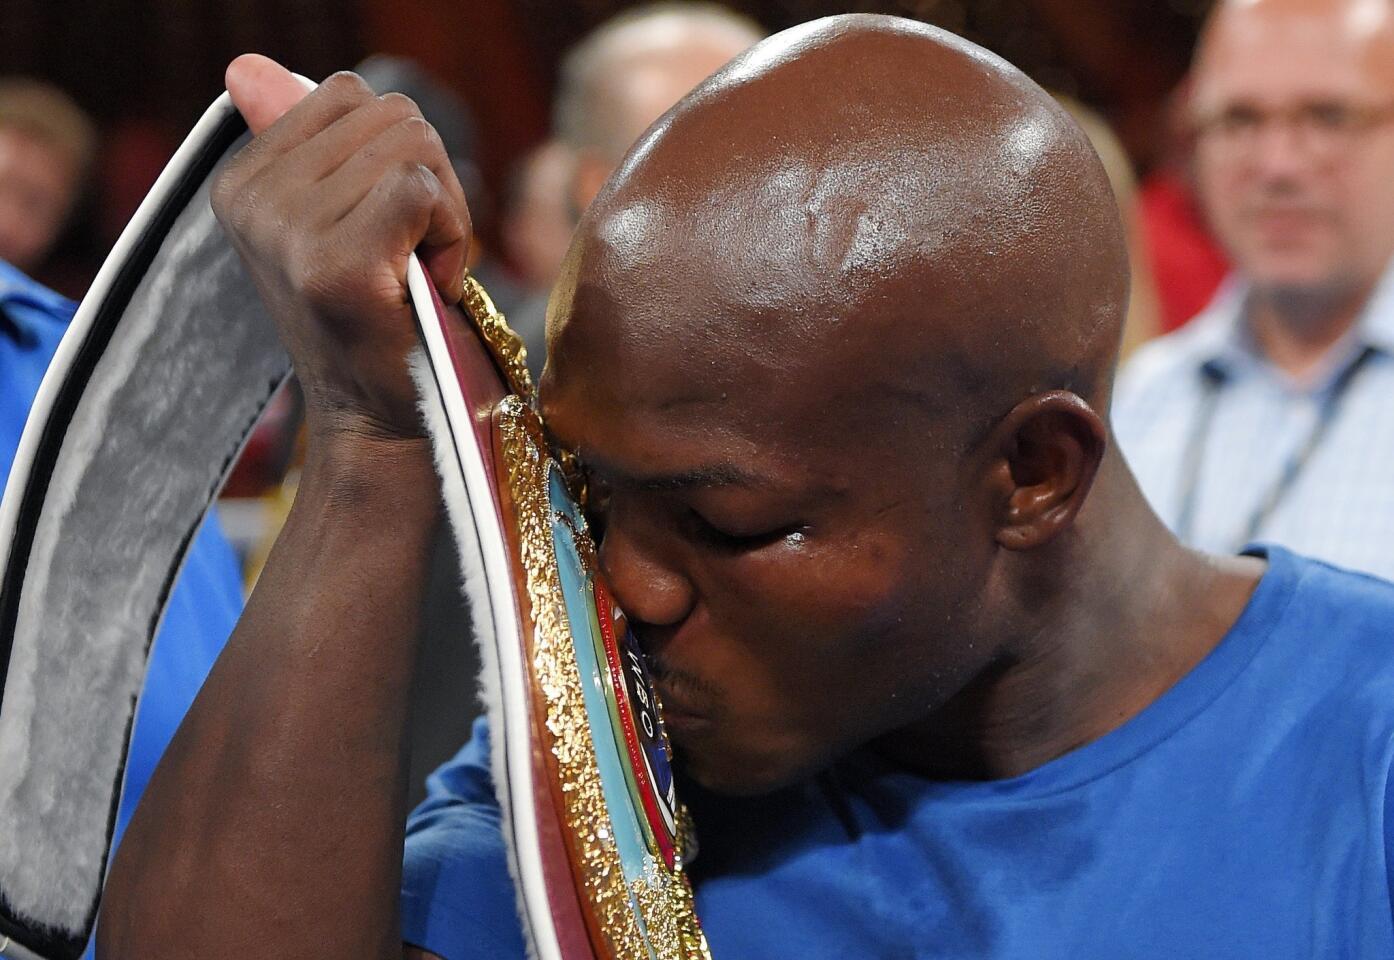 Timothy Bradley kisses the belt after defeating Jessie Vargas in a welterweight boxing match for the interim WBO title, Saturday, June 27, 2015, in Carson, Calif. (AP Photo/Mark J. Terrill)